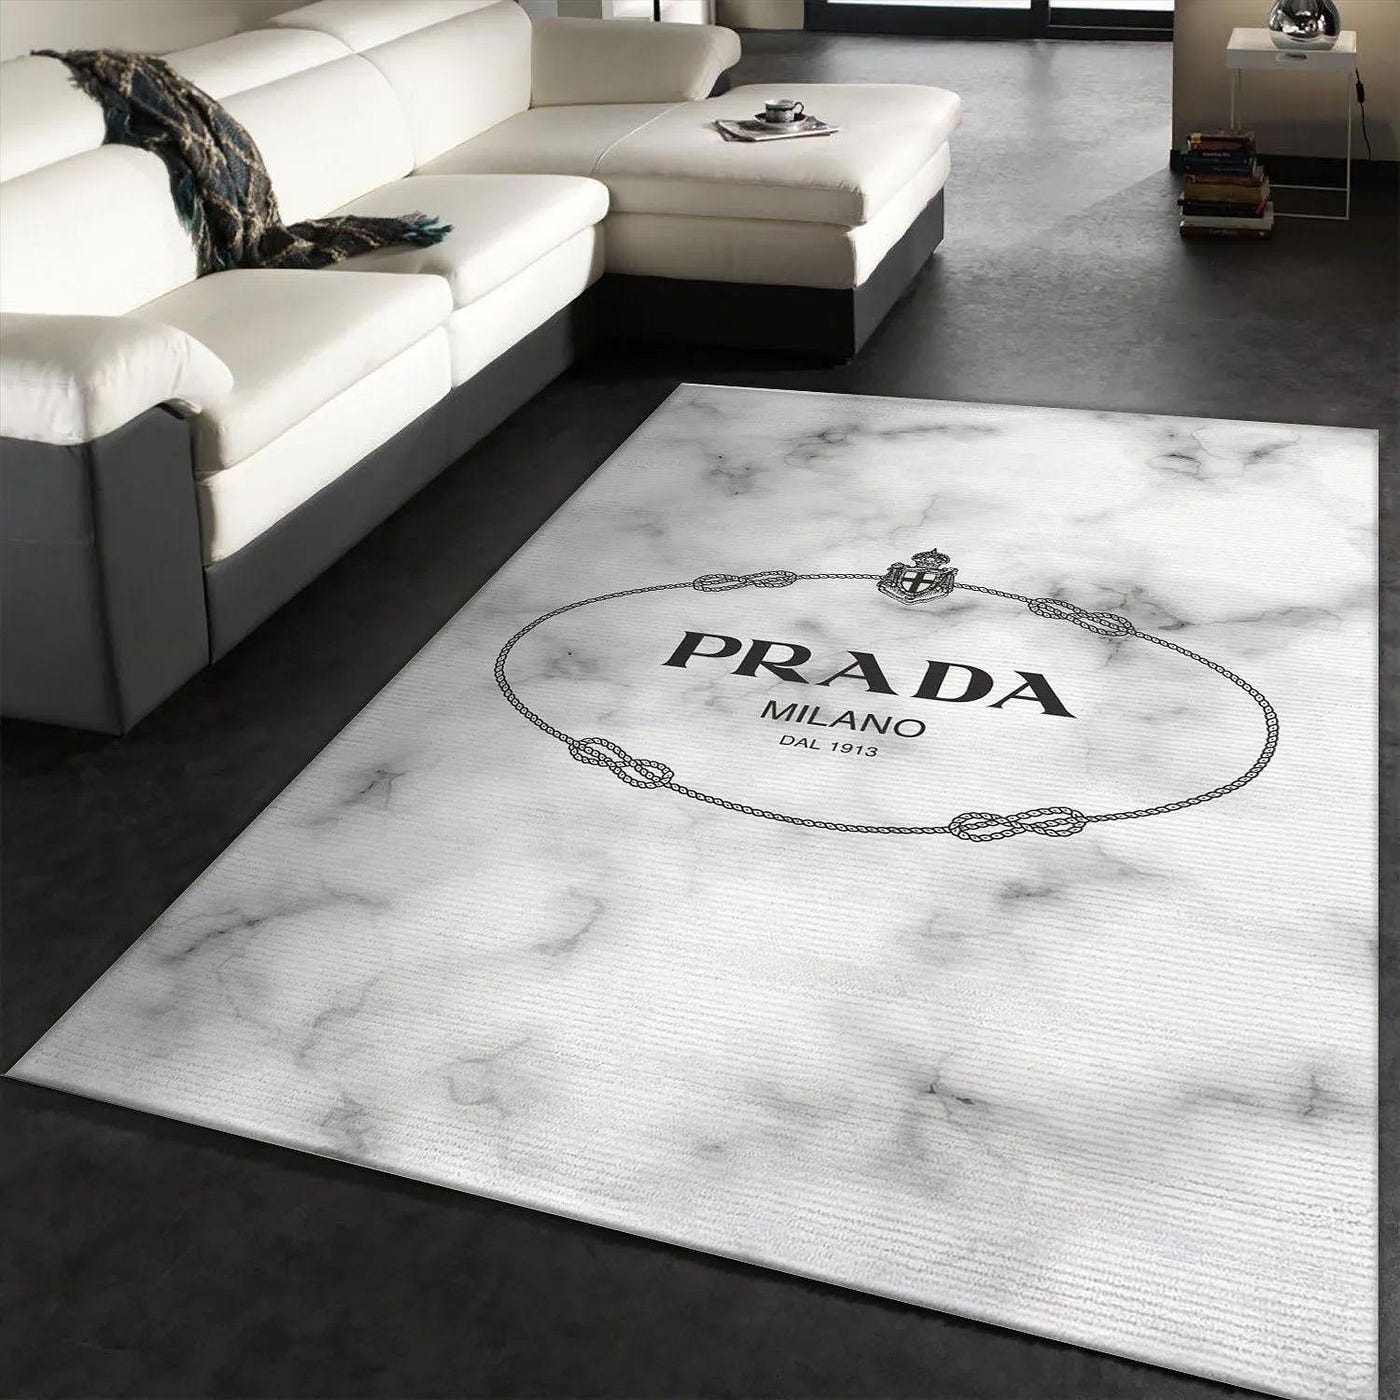 Add a Luxurious Modern Touch to Your Home Decor with this Prada Rug Bedroom  Floor Decor! | by son nguyen | Medium